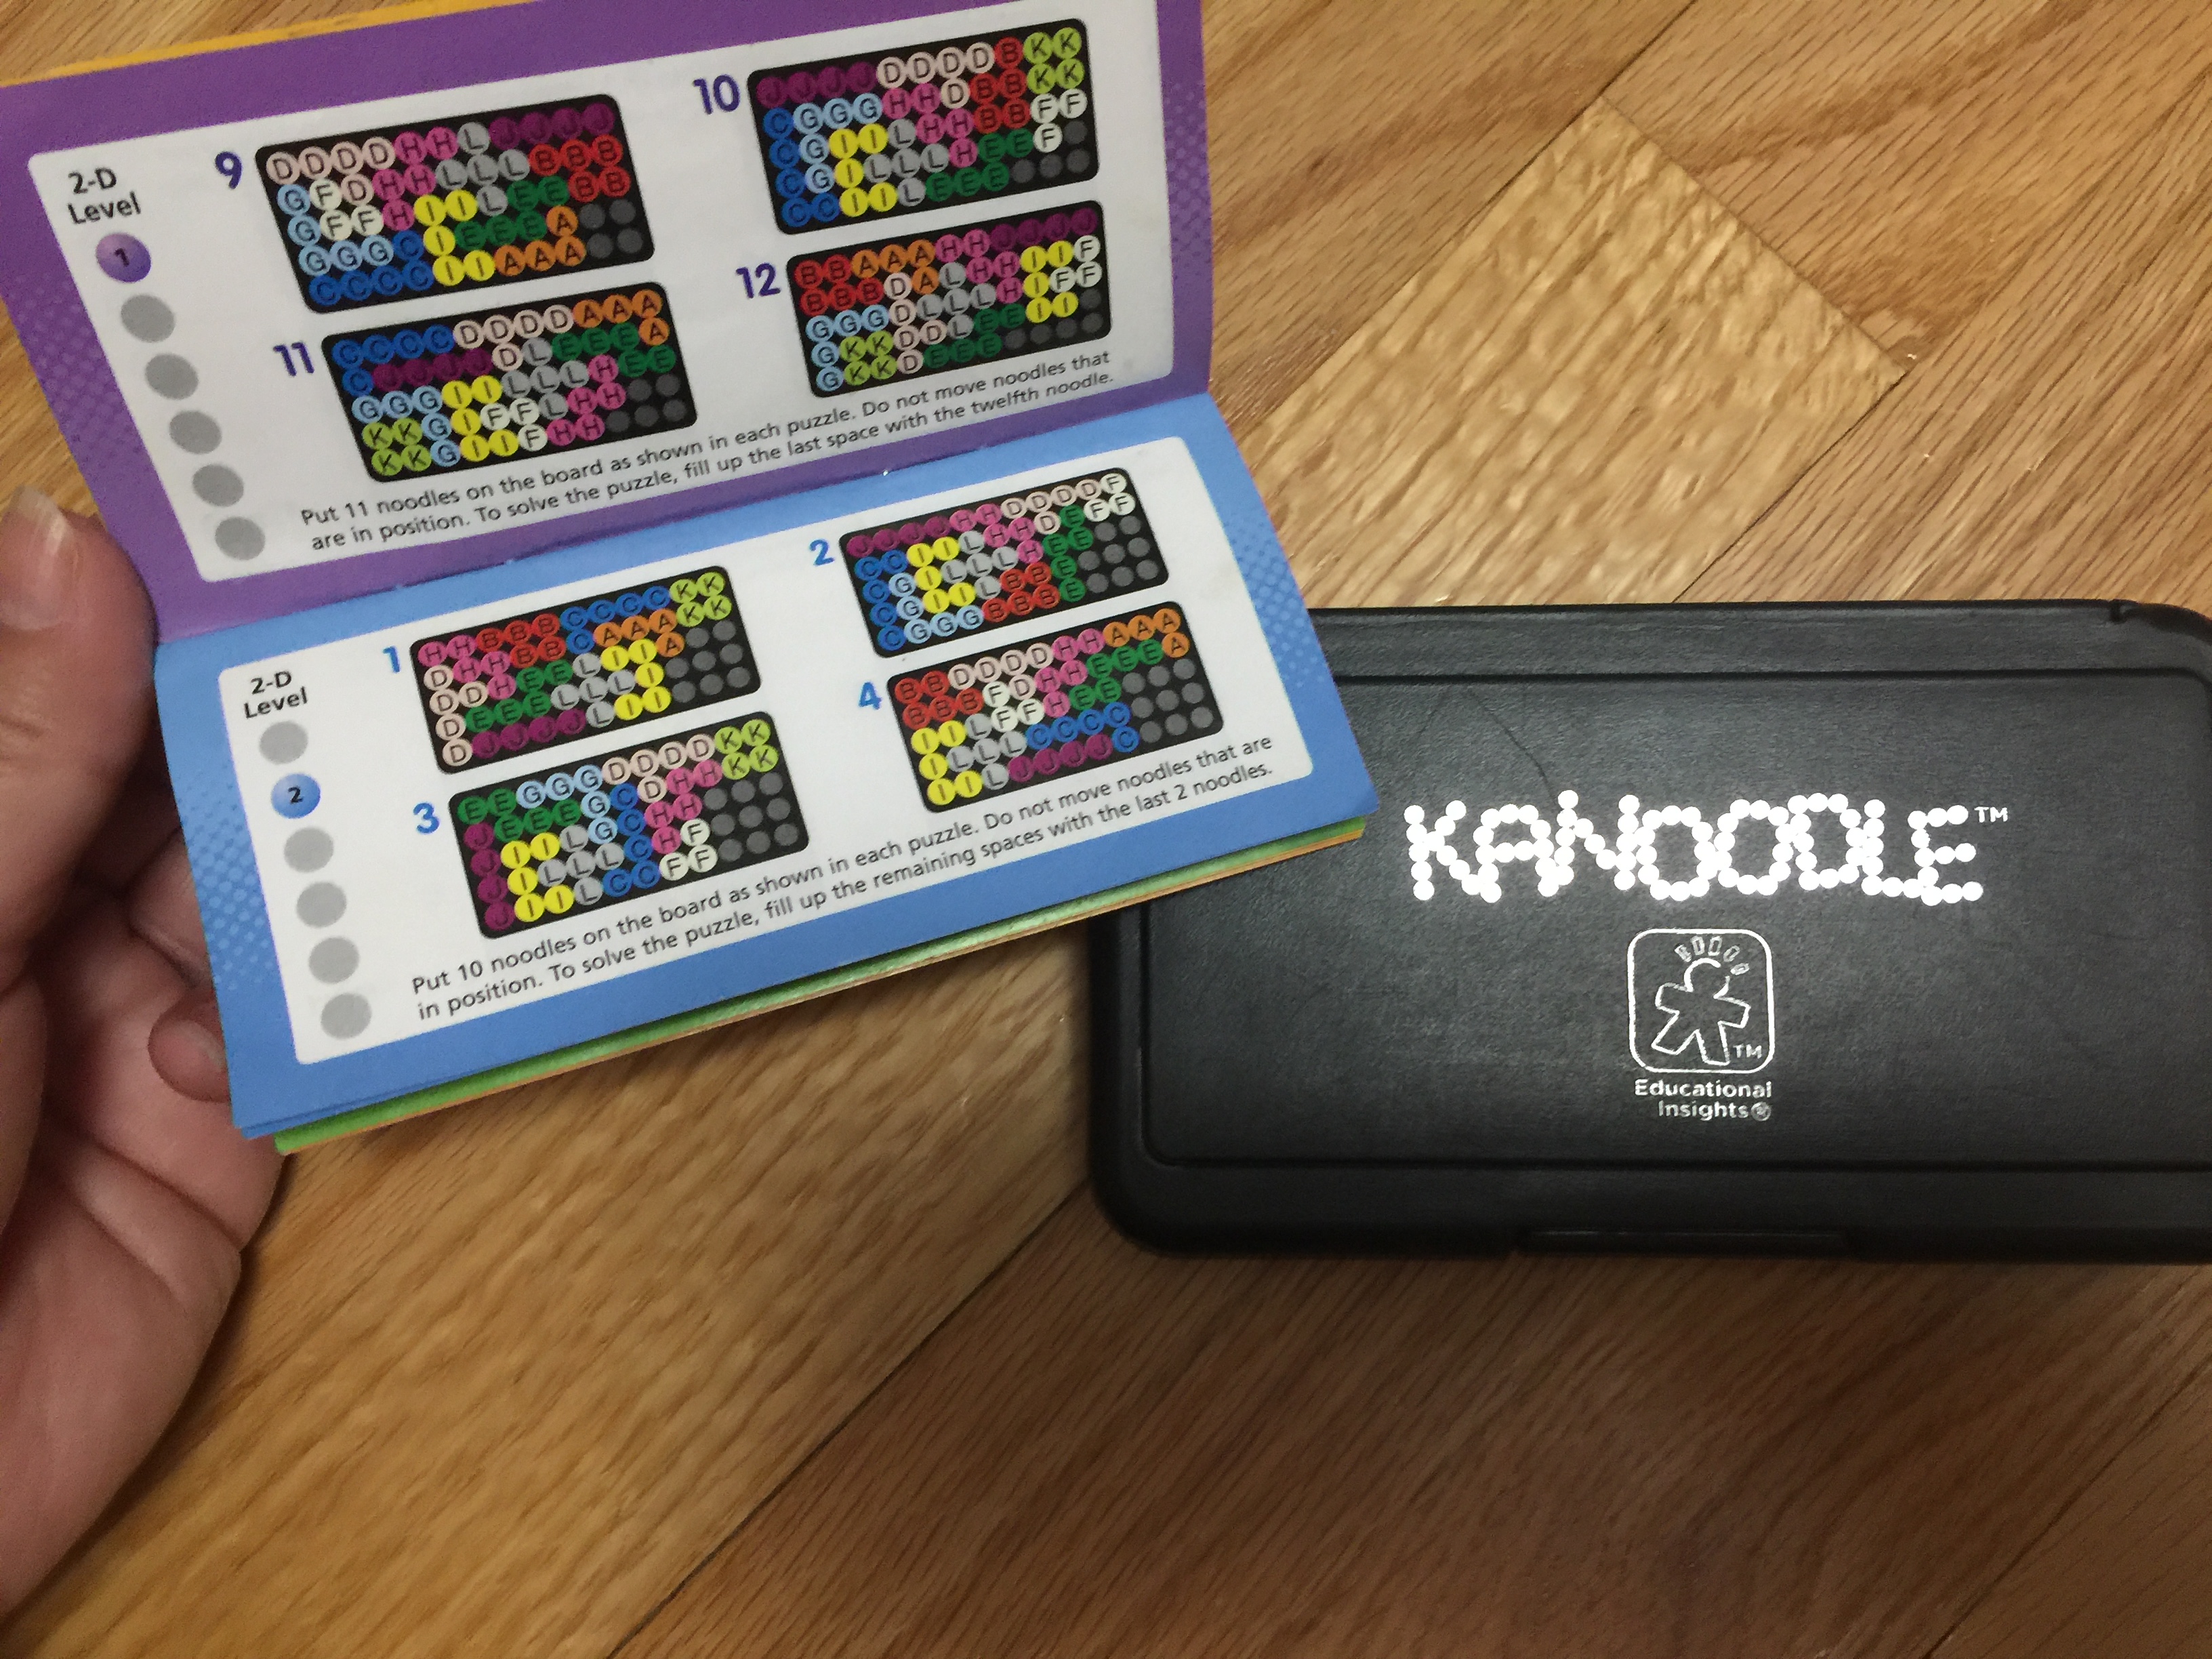 Kanoodle game and solution book